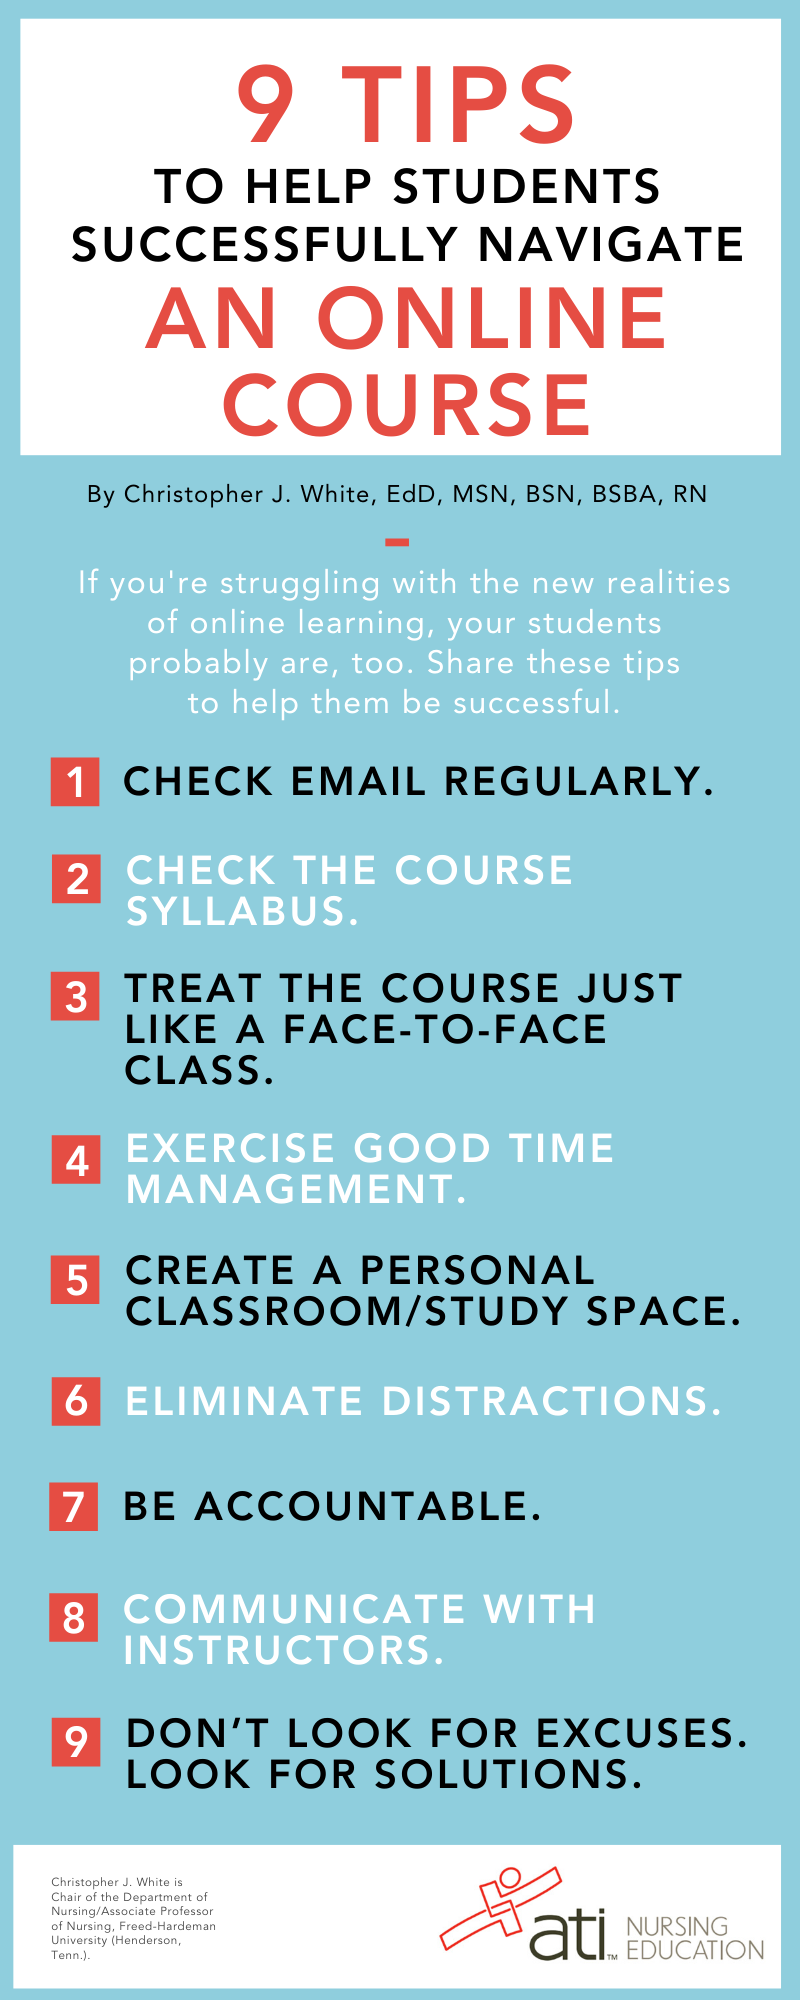 9 Tips on Creating a Positive Online Learning Environment - Brookes Blog